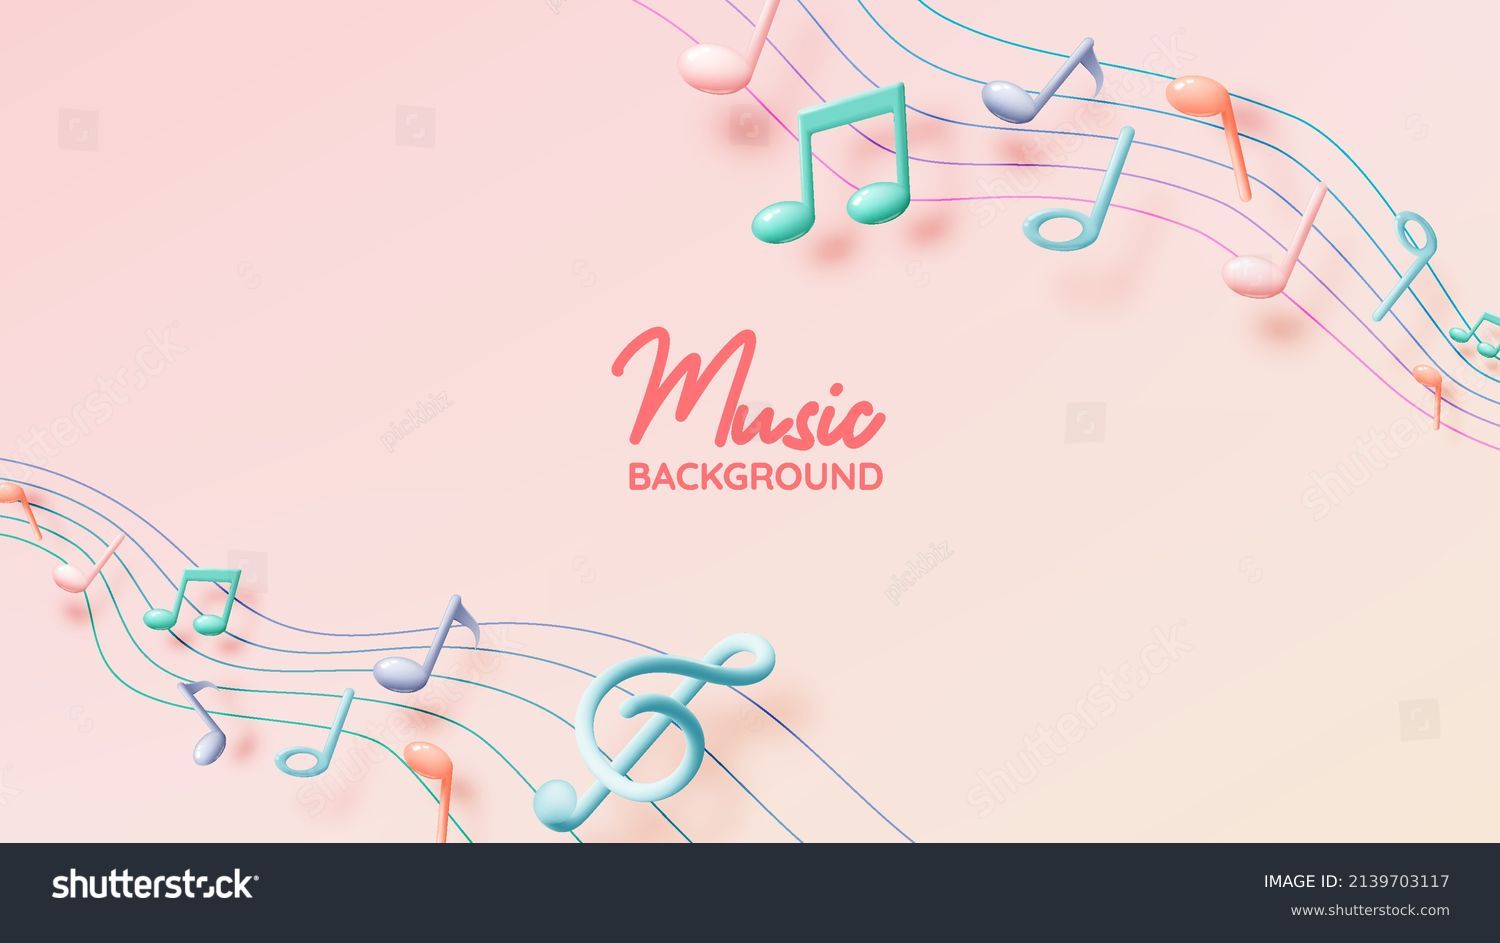 Music notes, song, melody or tune 3d realistic vector icon for musical apps and websites background vector illustration #2139703117